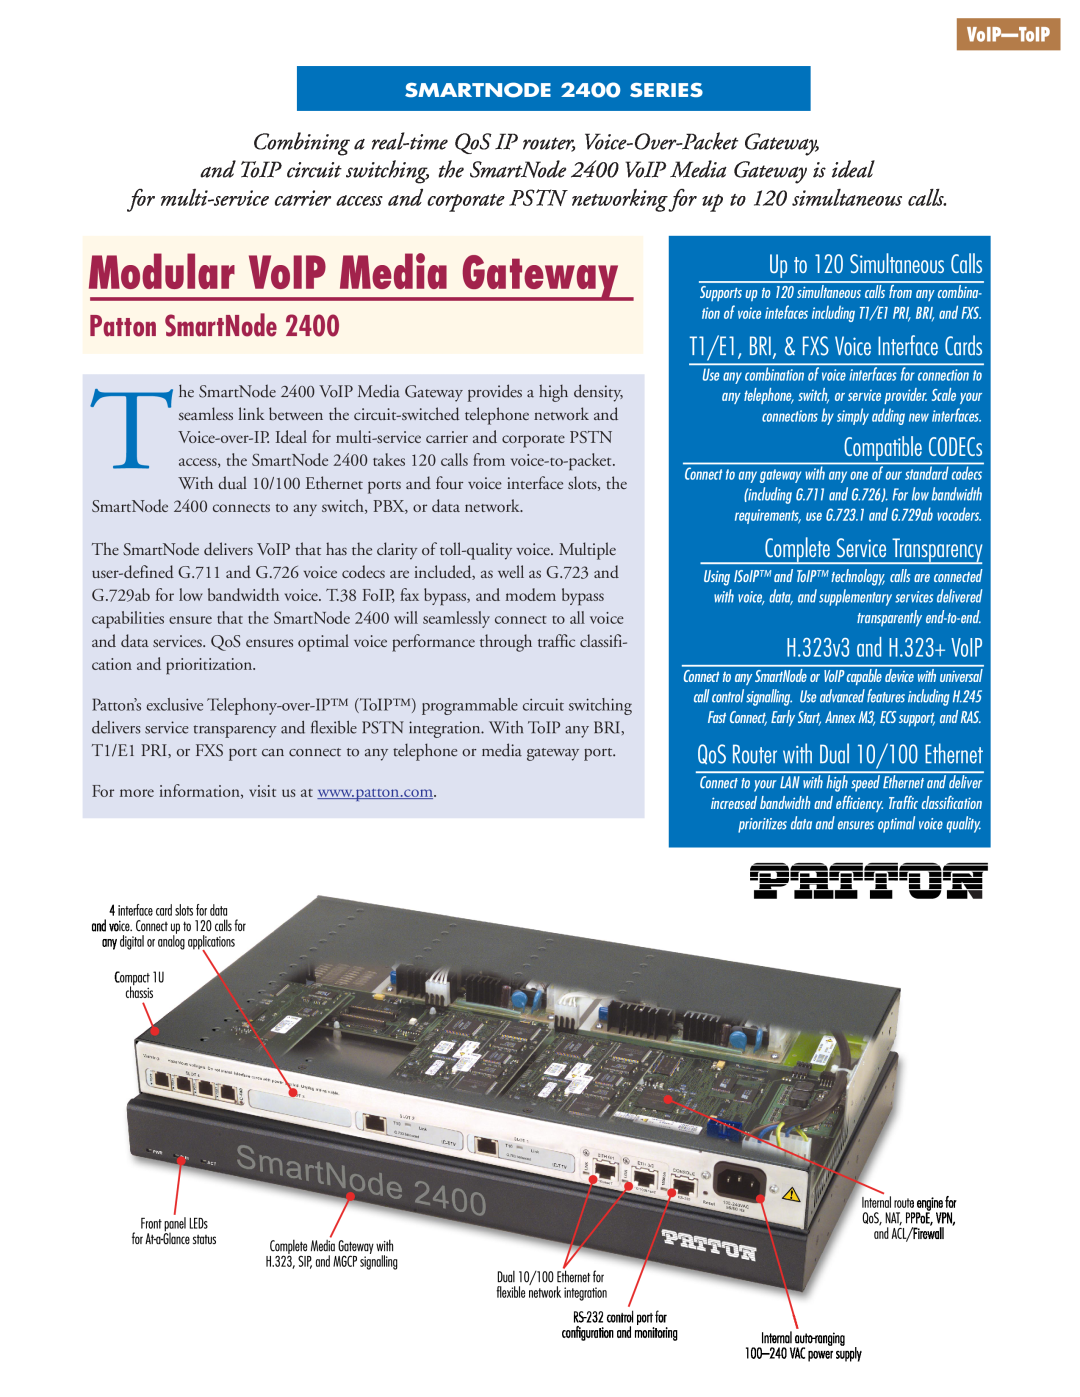 Patton electronic 2400 Series manual Modular VoIP Media Gateway, Patton SmartNode, H.323v3 and H.323+ VoIP 